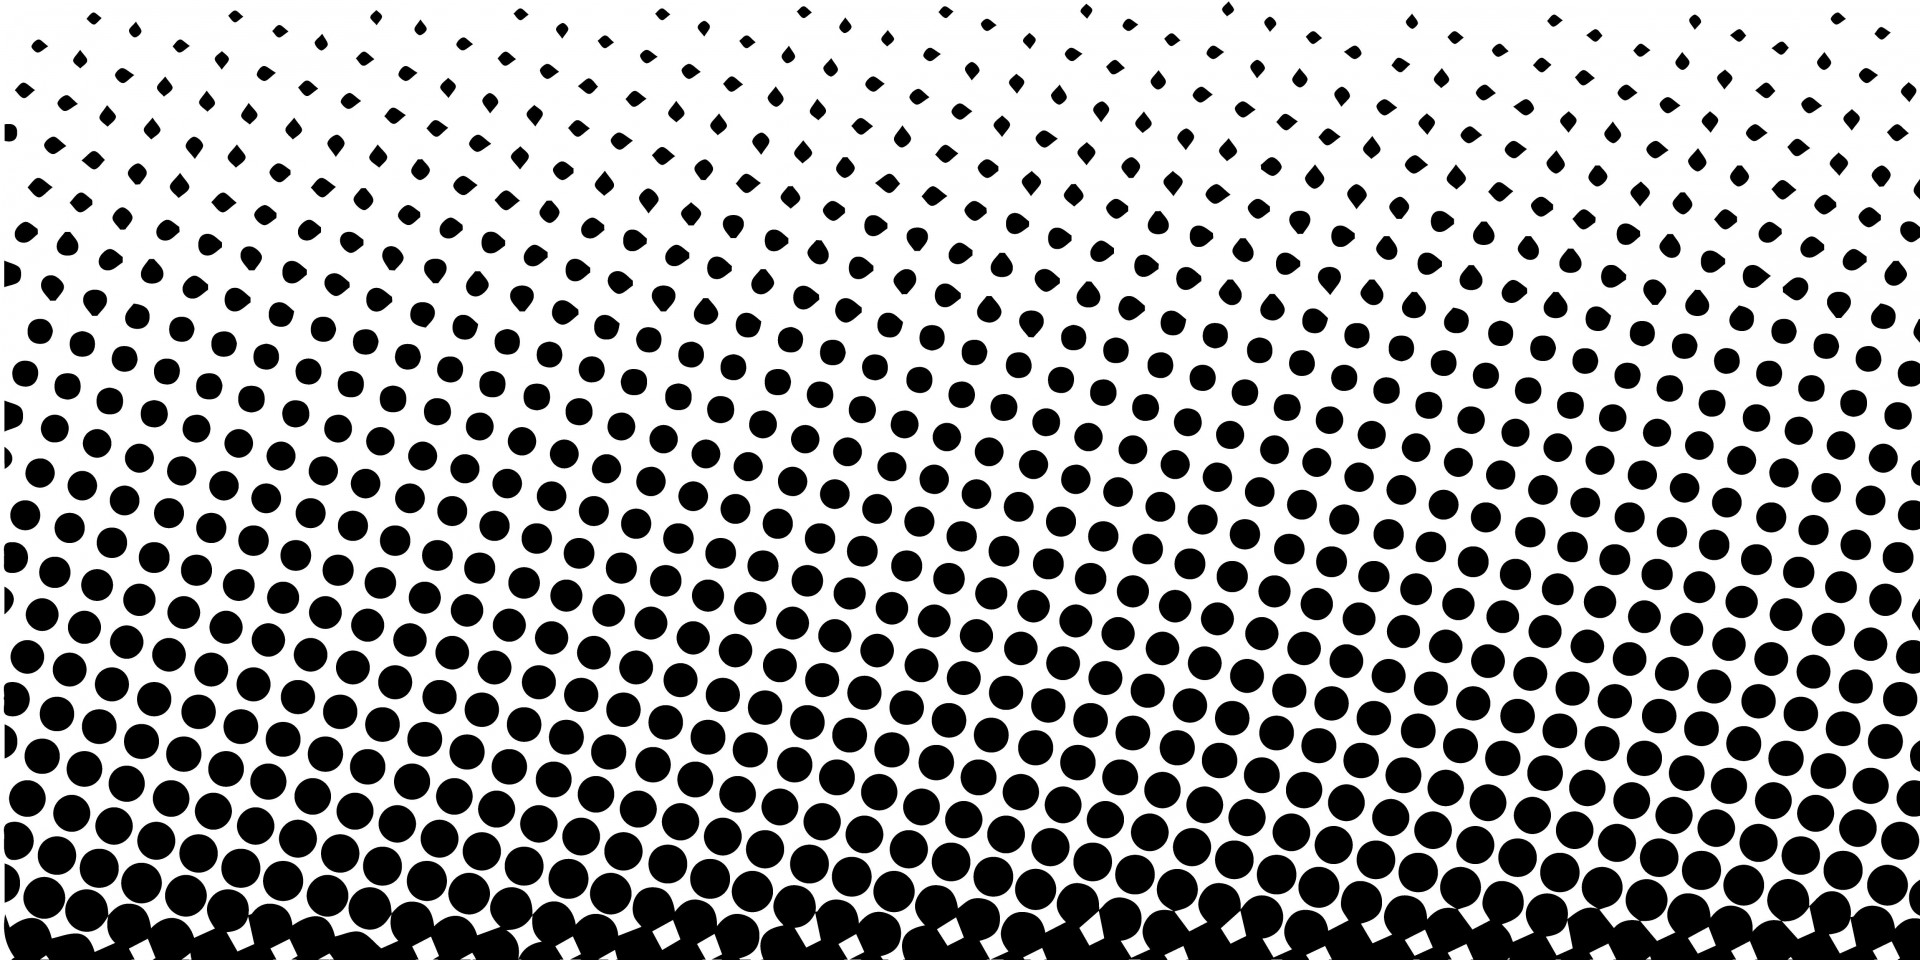 abstract design halftone free photo